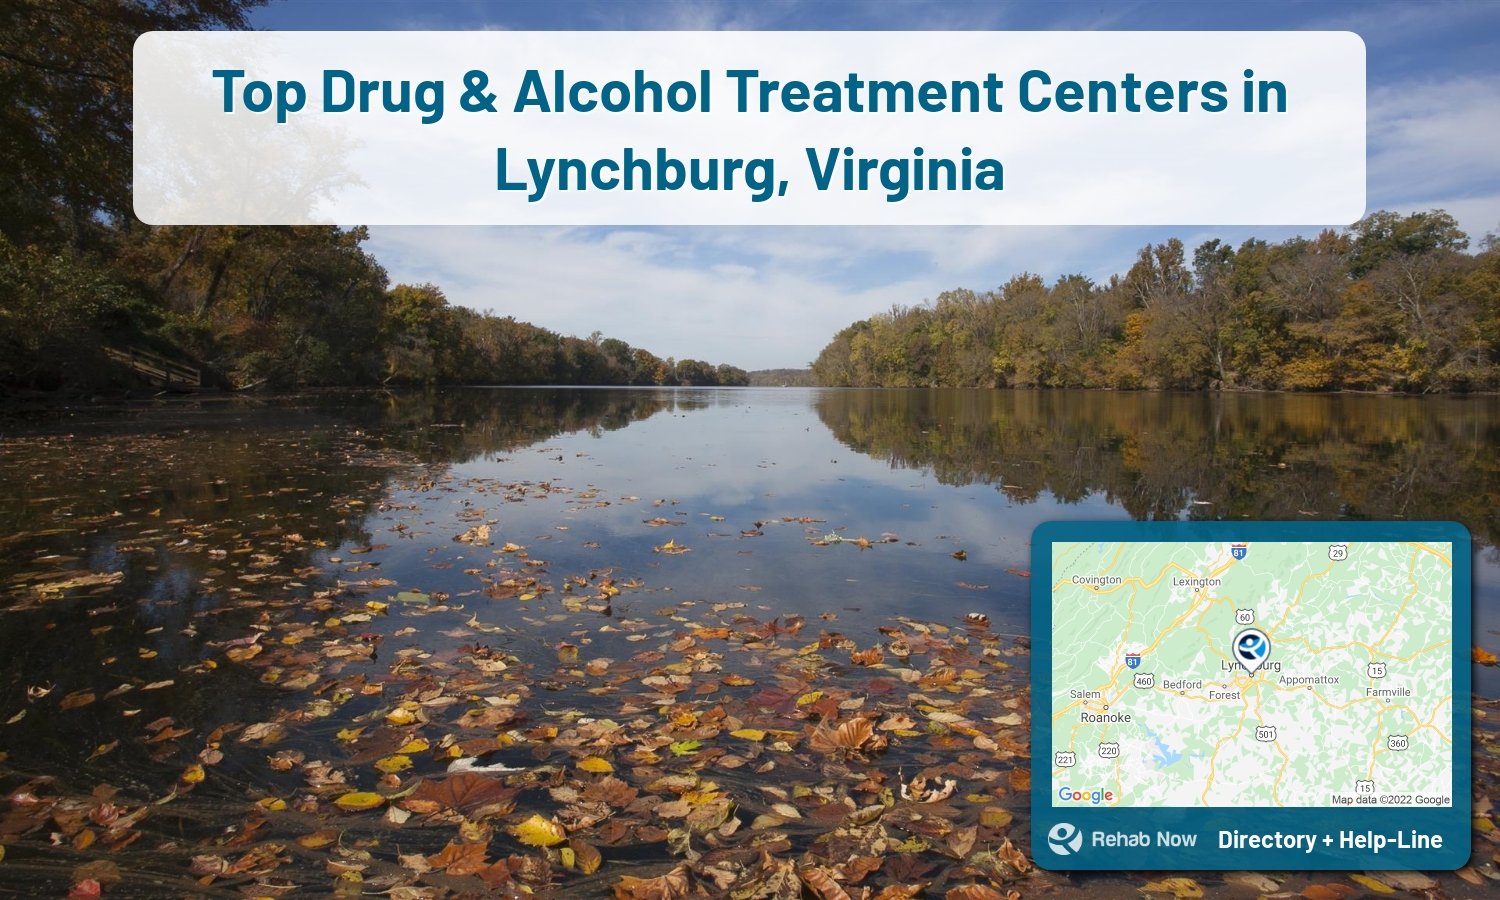 Ready to pick a rehab center in Lynchburg? Get off alcohol, opiates, and other drugs, by selecting top drug rehab centers in Virginia